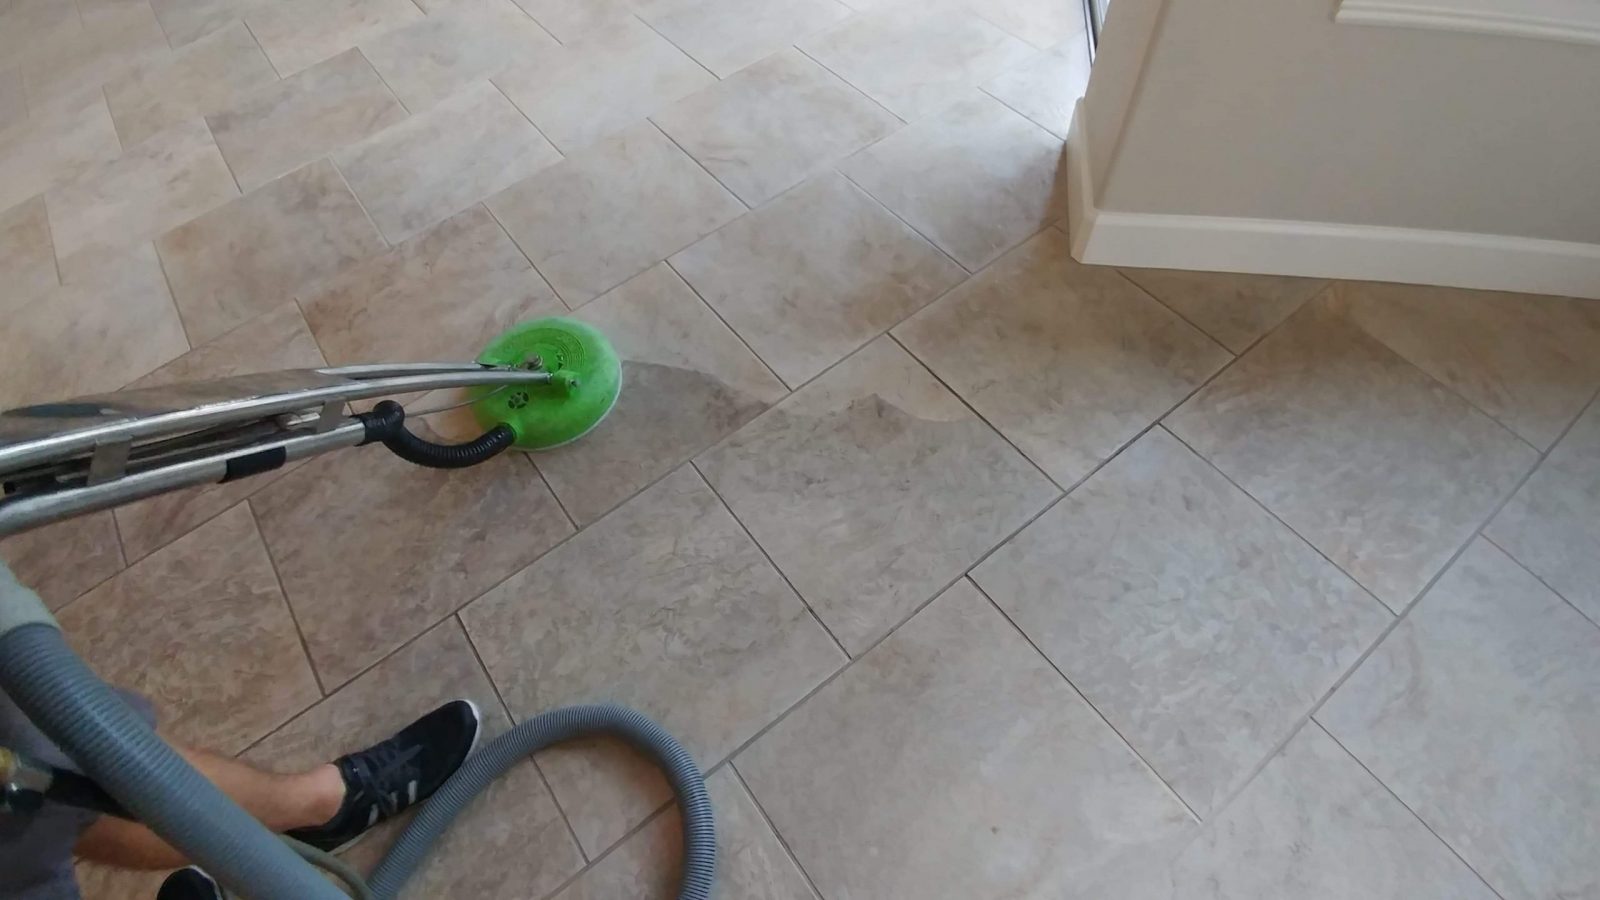 Professional Tile and Grout Cleaning Image Palm Harbor Sample 7